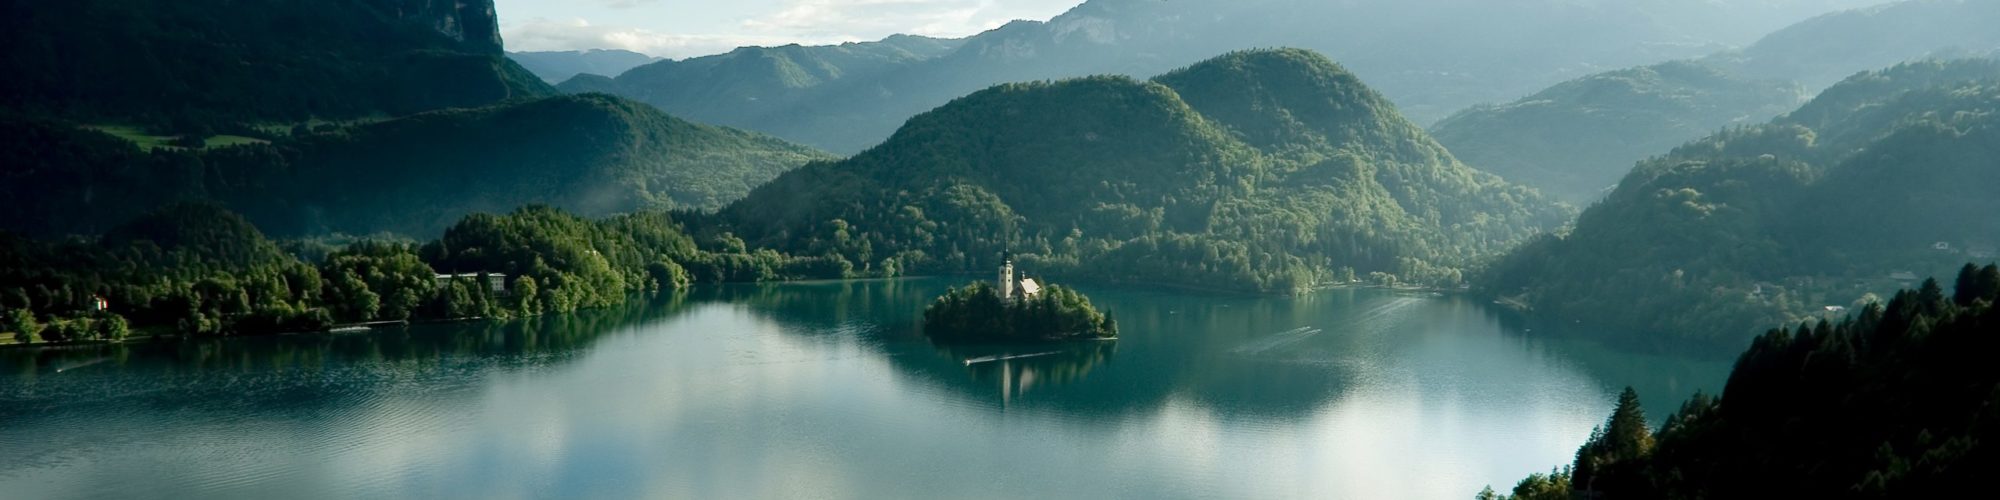 Slovenia Travel travel agents packages deals